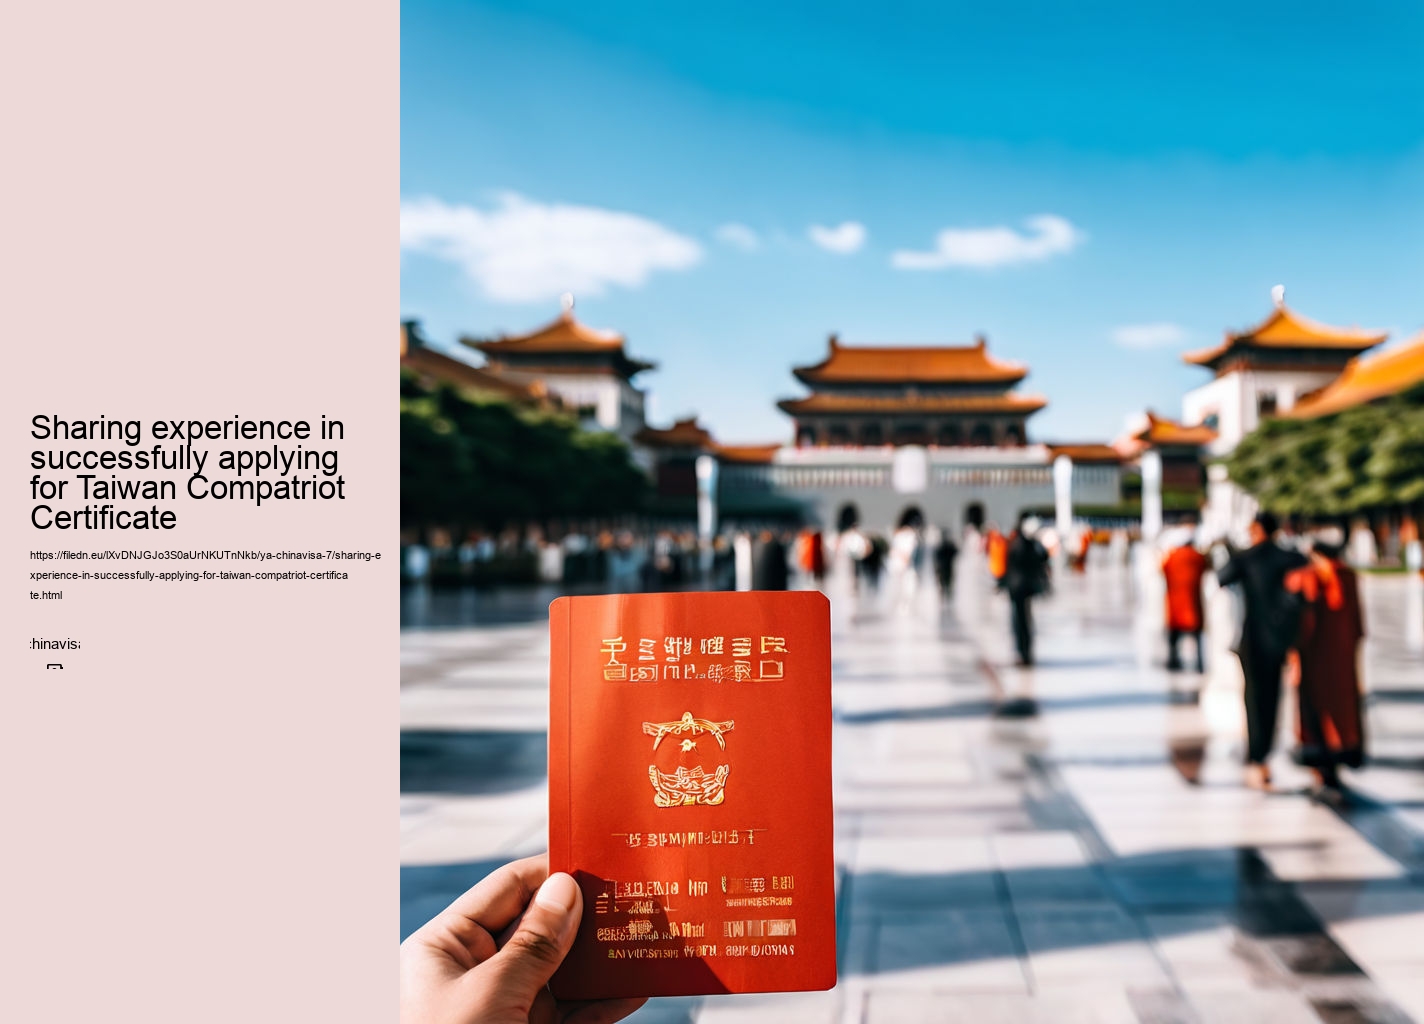 Sharing experience in successfully applying for Taiwan Compatriot Certificate